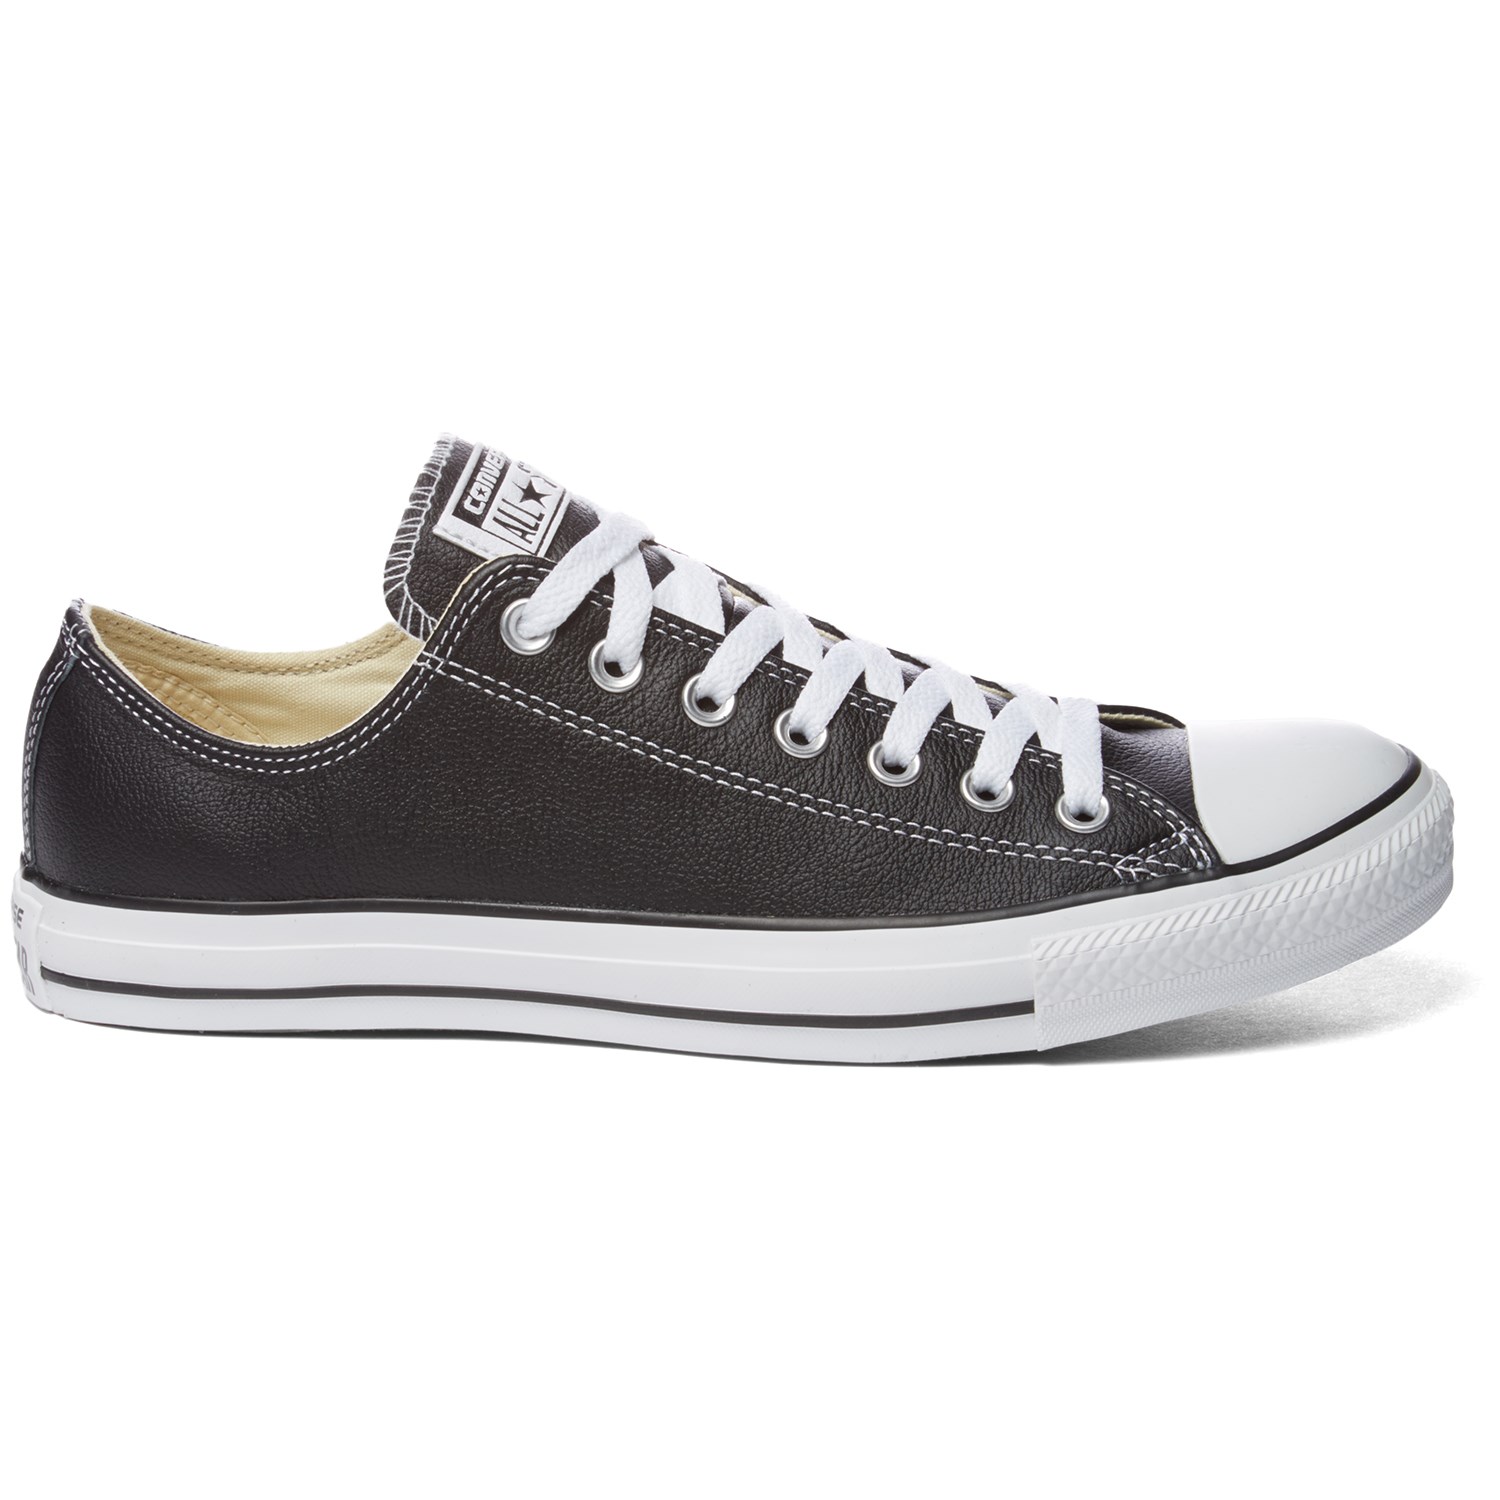 Chuck Taylor Star Leather OX Shoes | evo